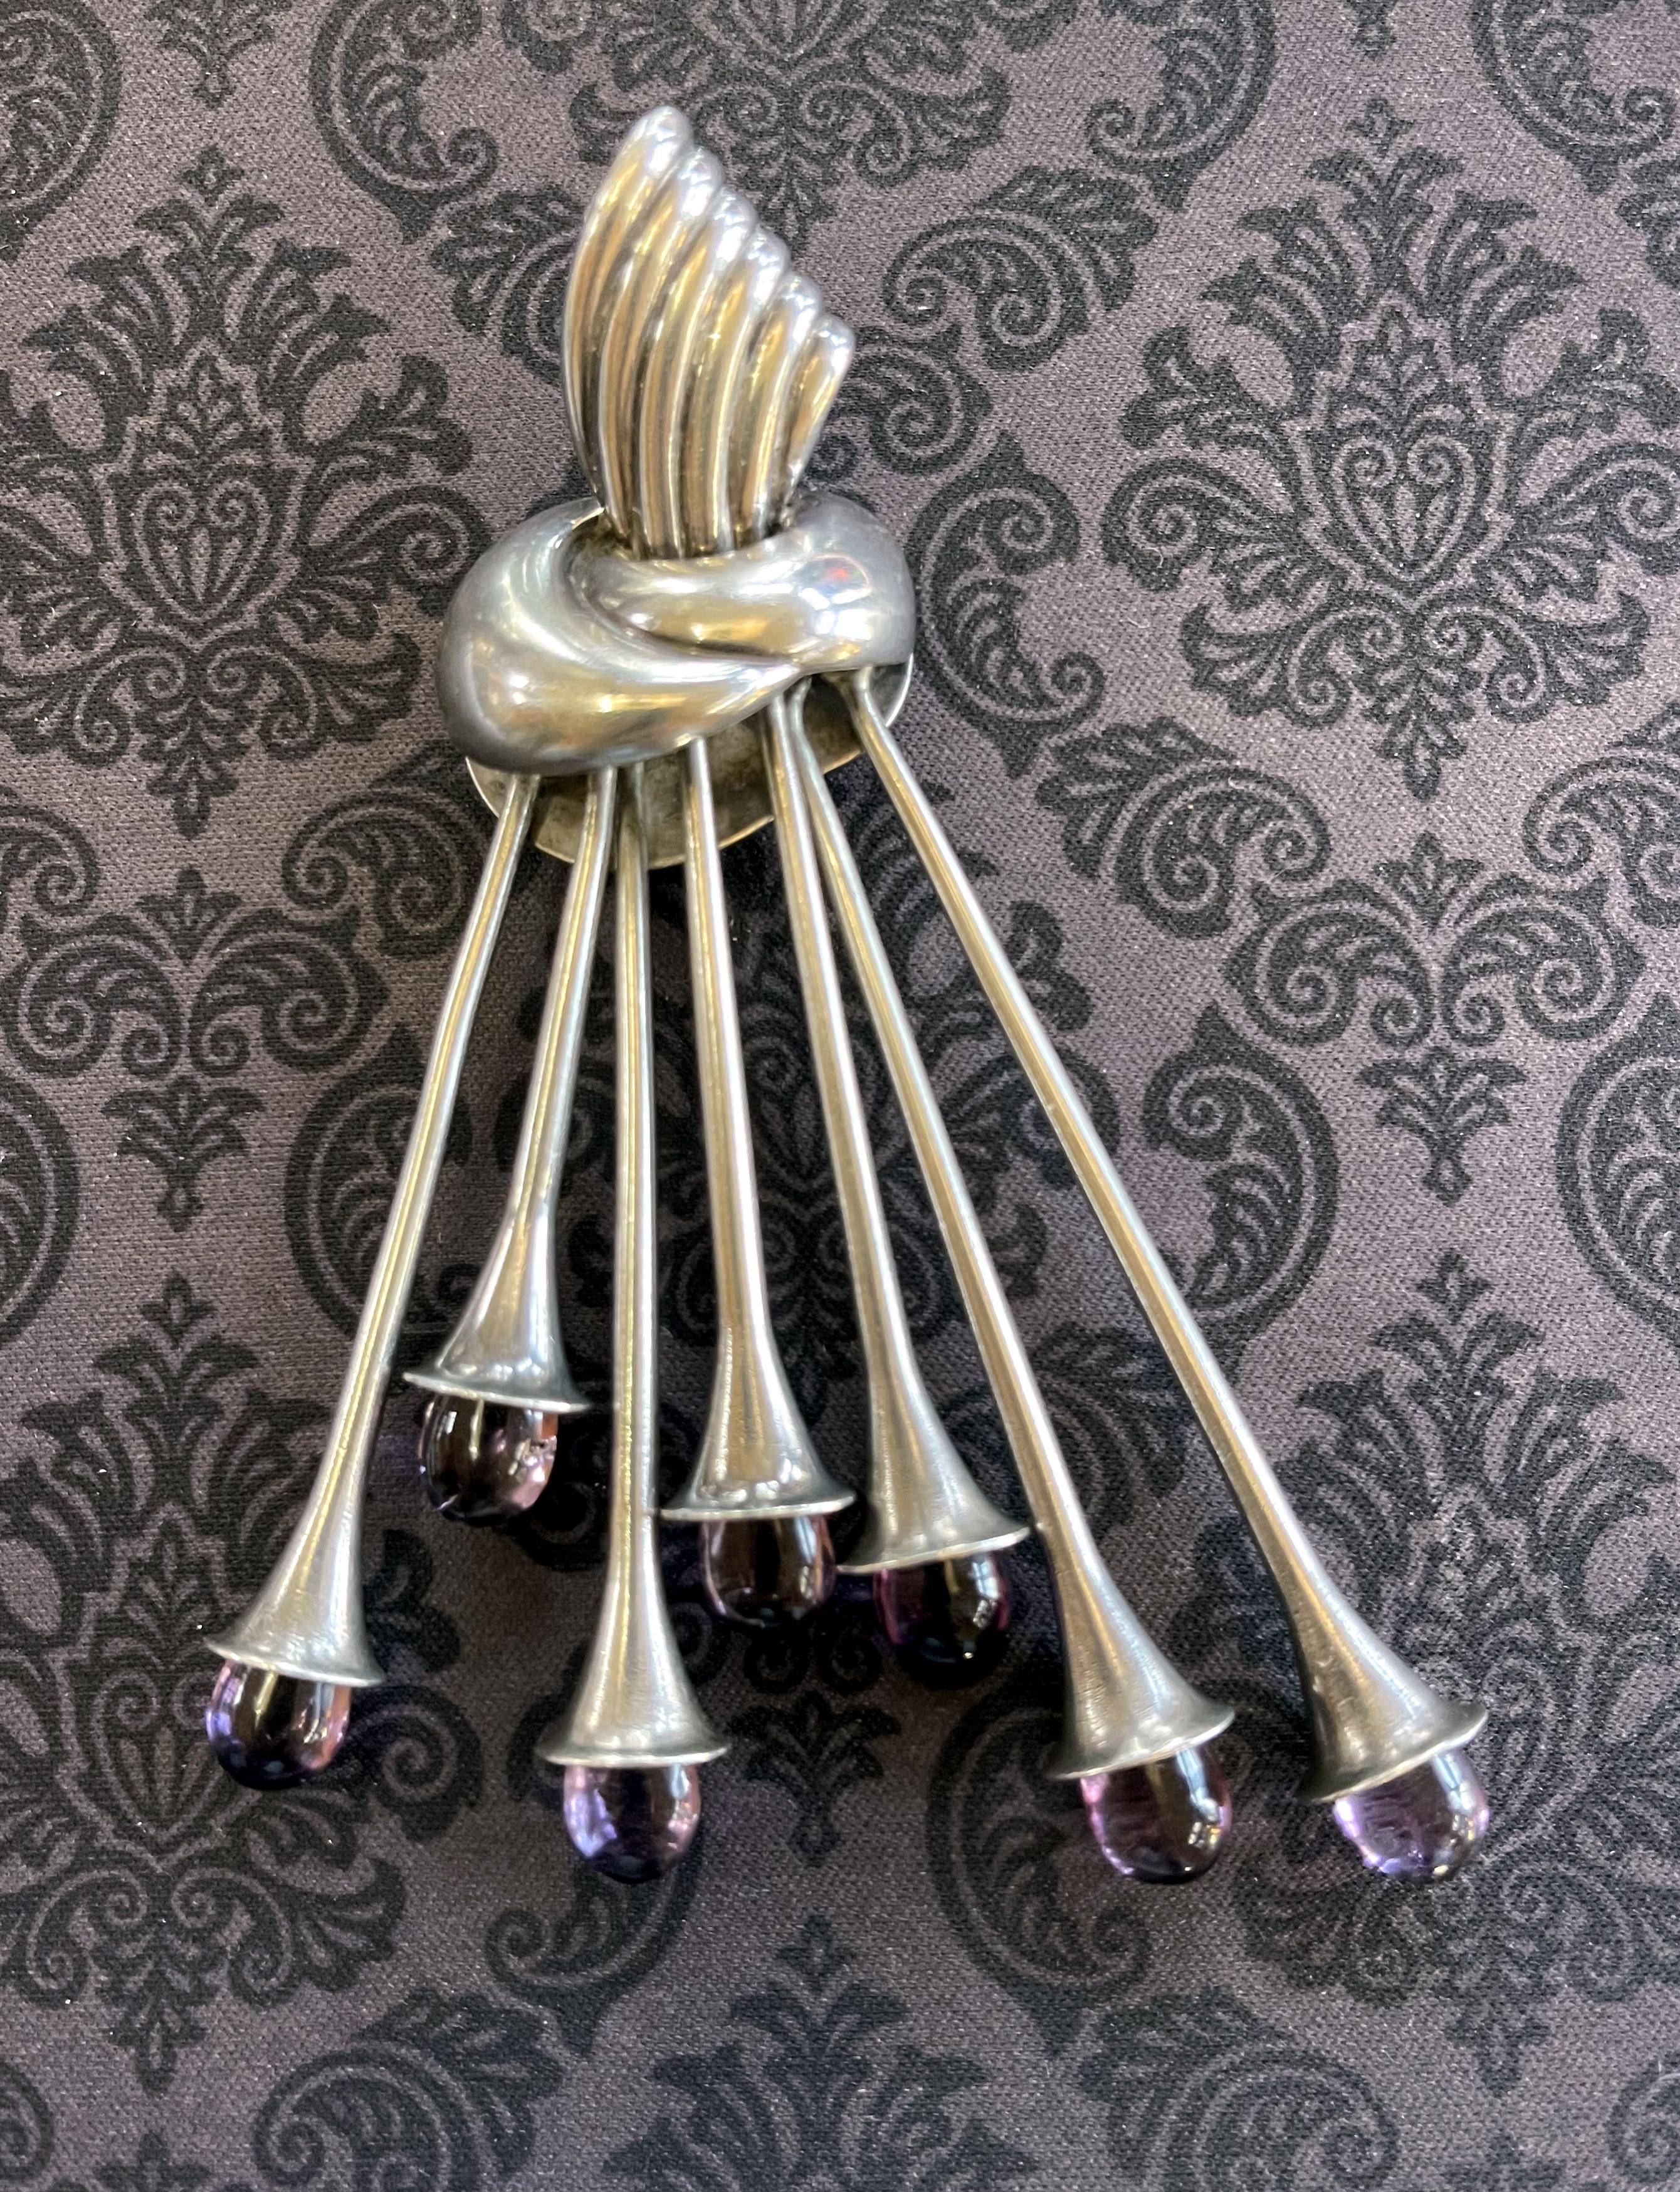 A large Mexican Modern brooch by Antonio Pineda Taxco circa 1950-60s. The bespoken piece features seven articulated sprays from a ribbon knot, stamens-like, and capped with amethyst stones at the ends. The design is bold and refined at the same